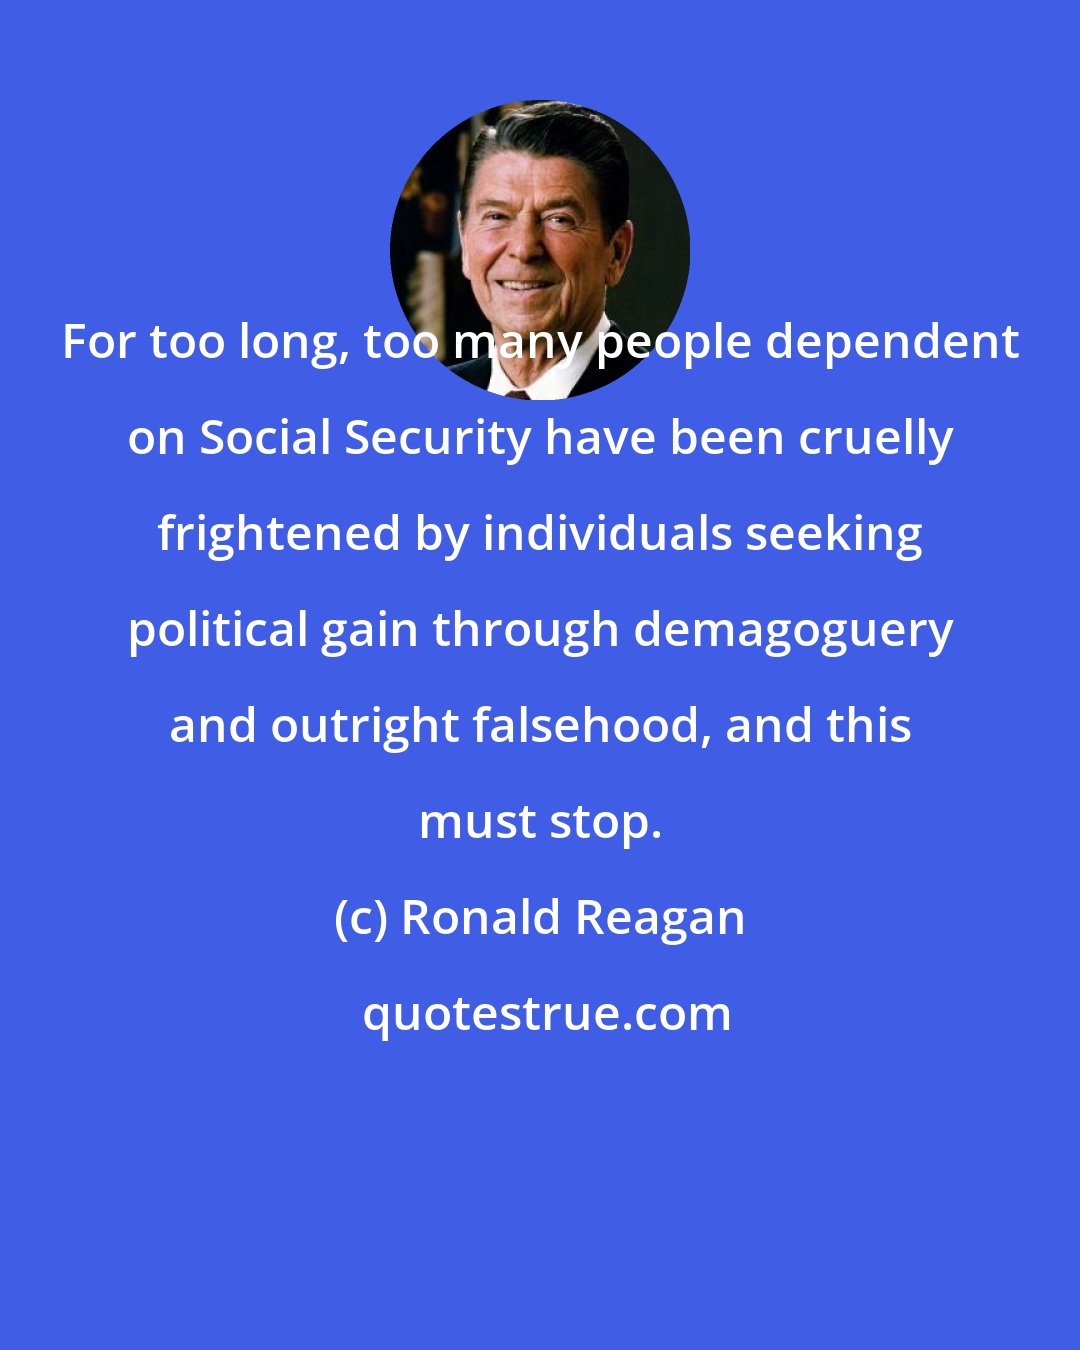 Ronald Reagan: For too long, too many people dependent on Social Security have been cruelly frightened by individuals seeking political gain through demagoguery and outright falsehood, and this must stop.